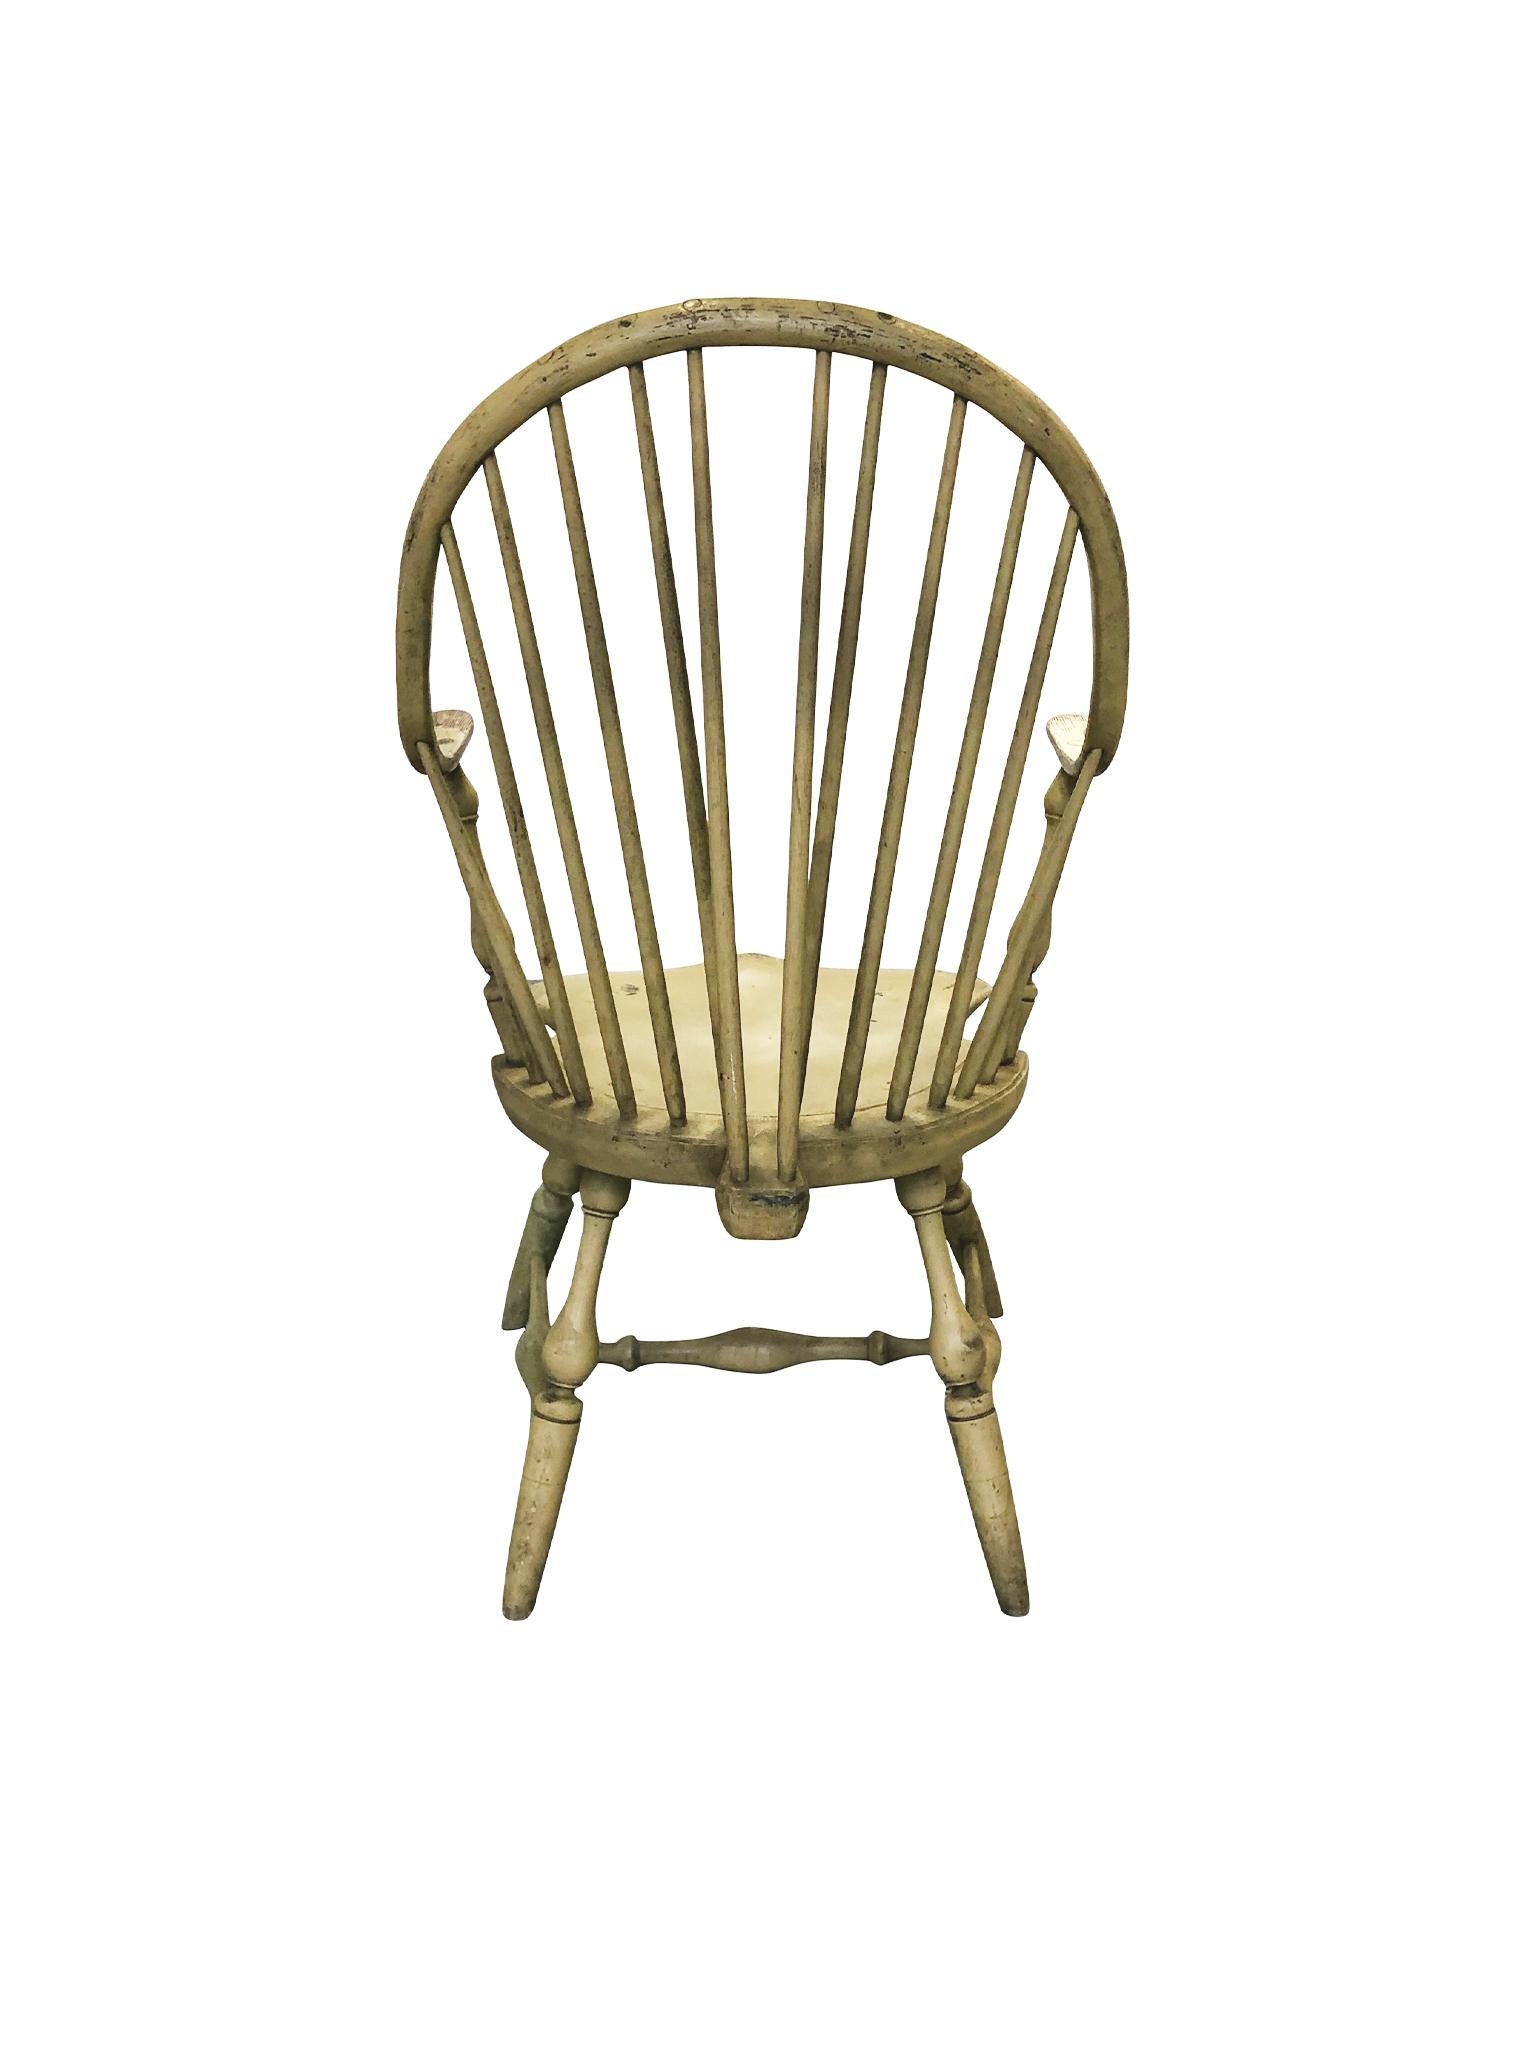 American Vintage New York Style Windsor Chair by Bill Wallick